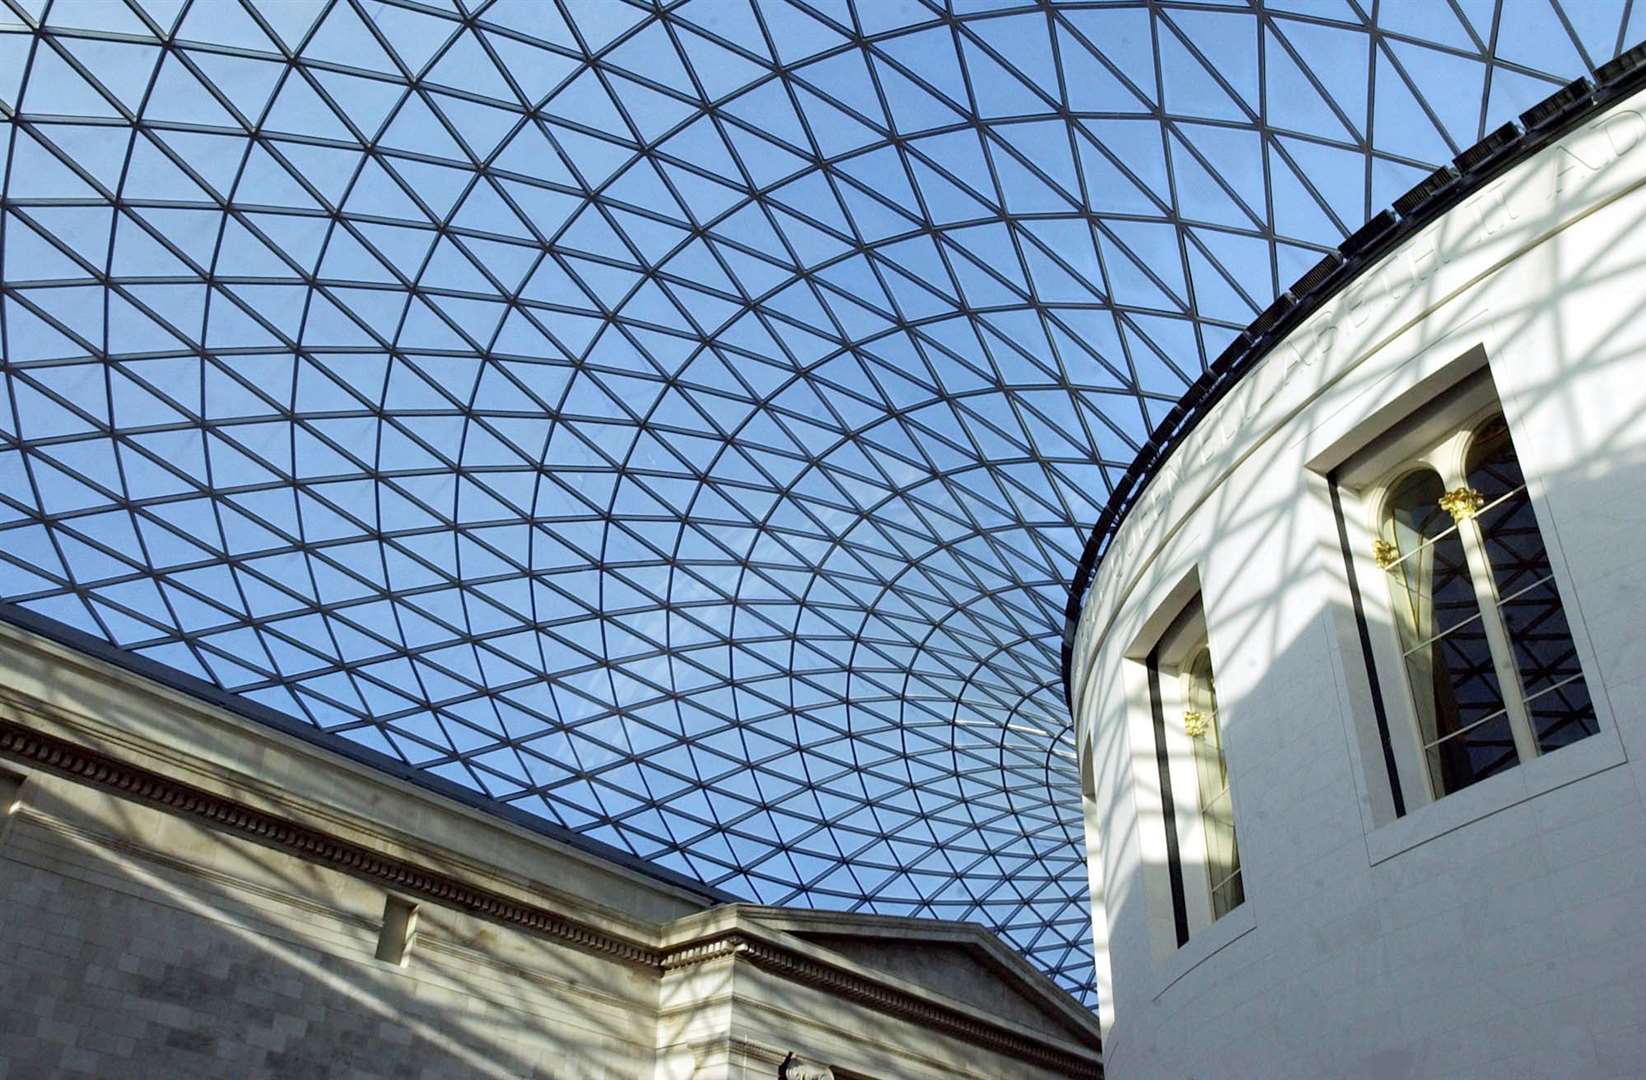 No arrests have been made following reports of theft from the British Museum in London (Chris Young/PA)